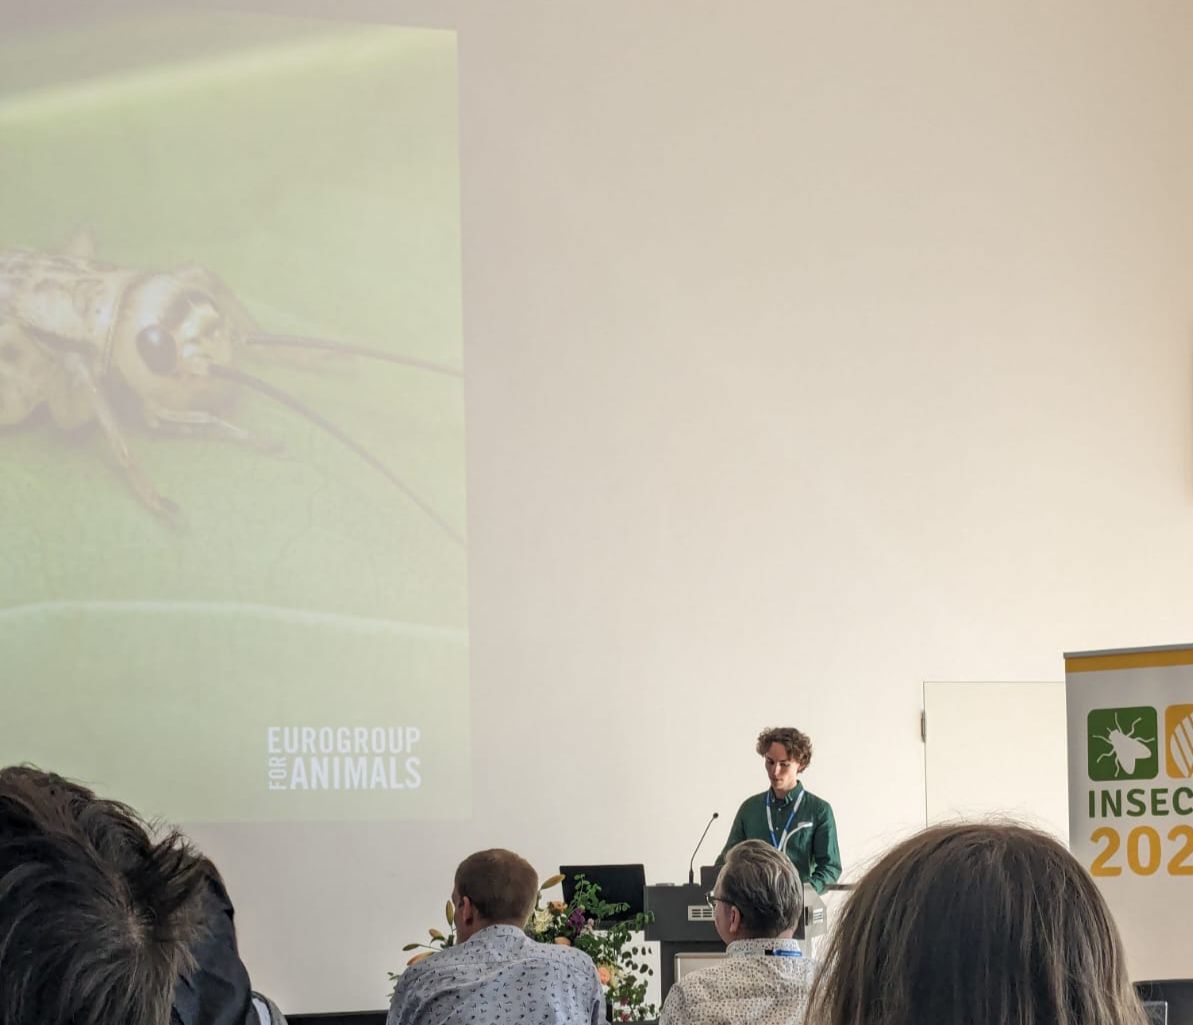 Our political adviser for insect farming, Francis Maugère speaks at the #Insecta2024 conference to share our Scientific Declaration on Insects Sentience and Welfare (bit.ly/3SIgLBU), and discuss the issue of welfare on insect farms with producers and researchers. 👏🦗